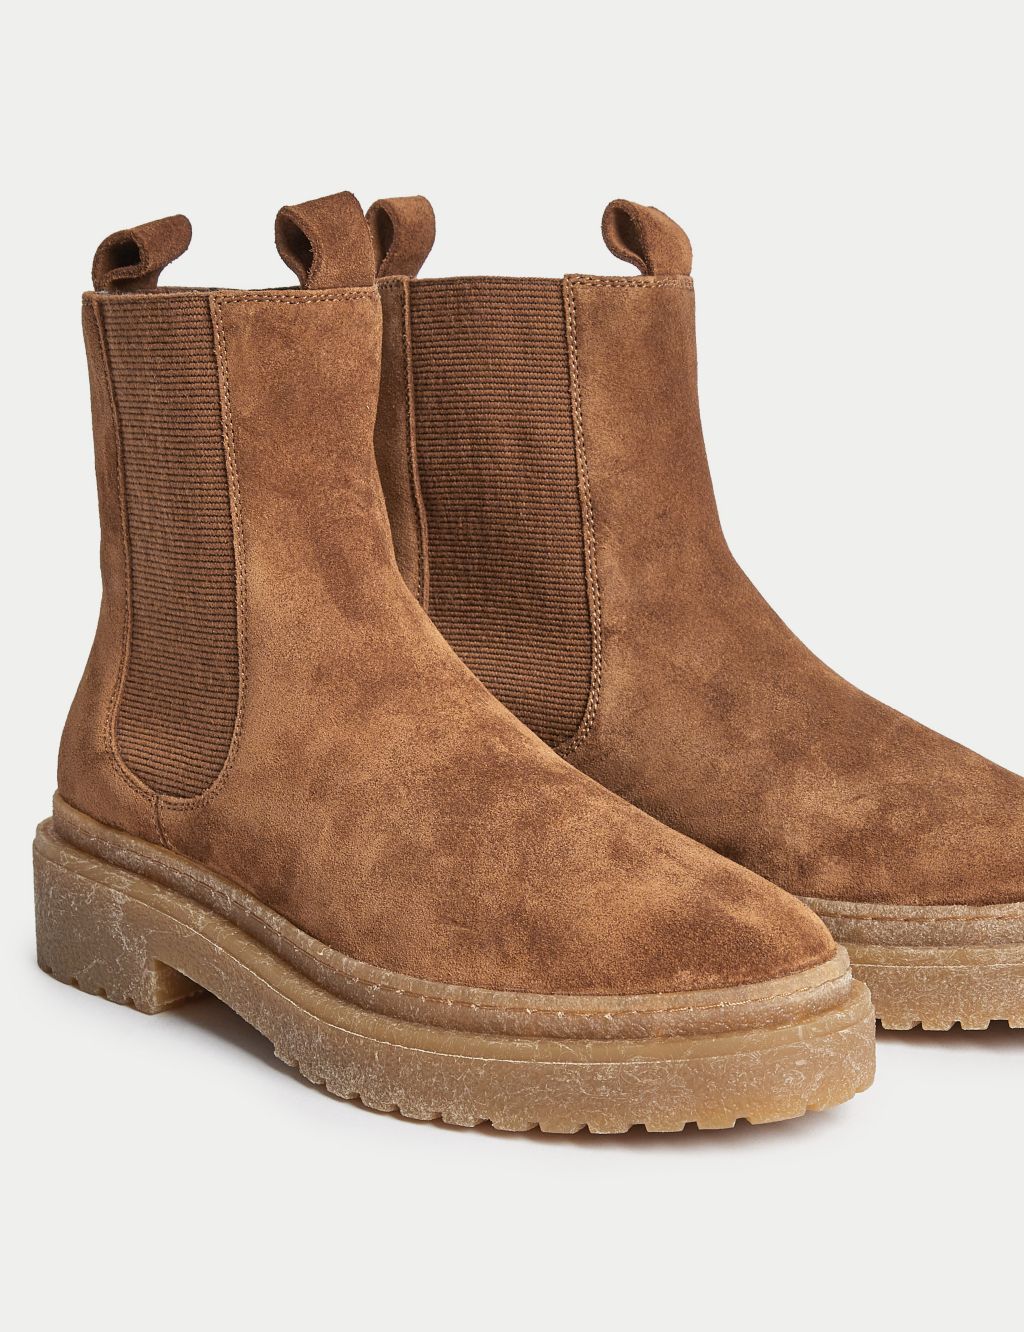 Suede Chelsea Flat Boots image 3